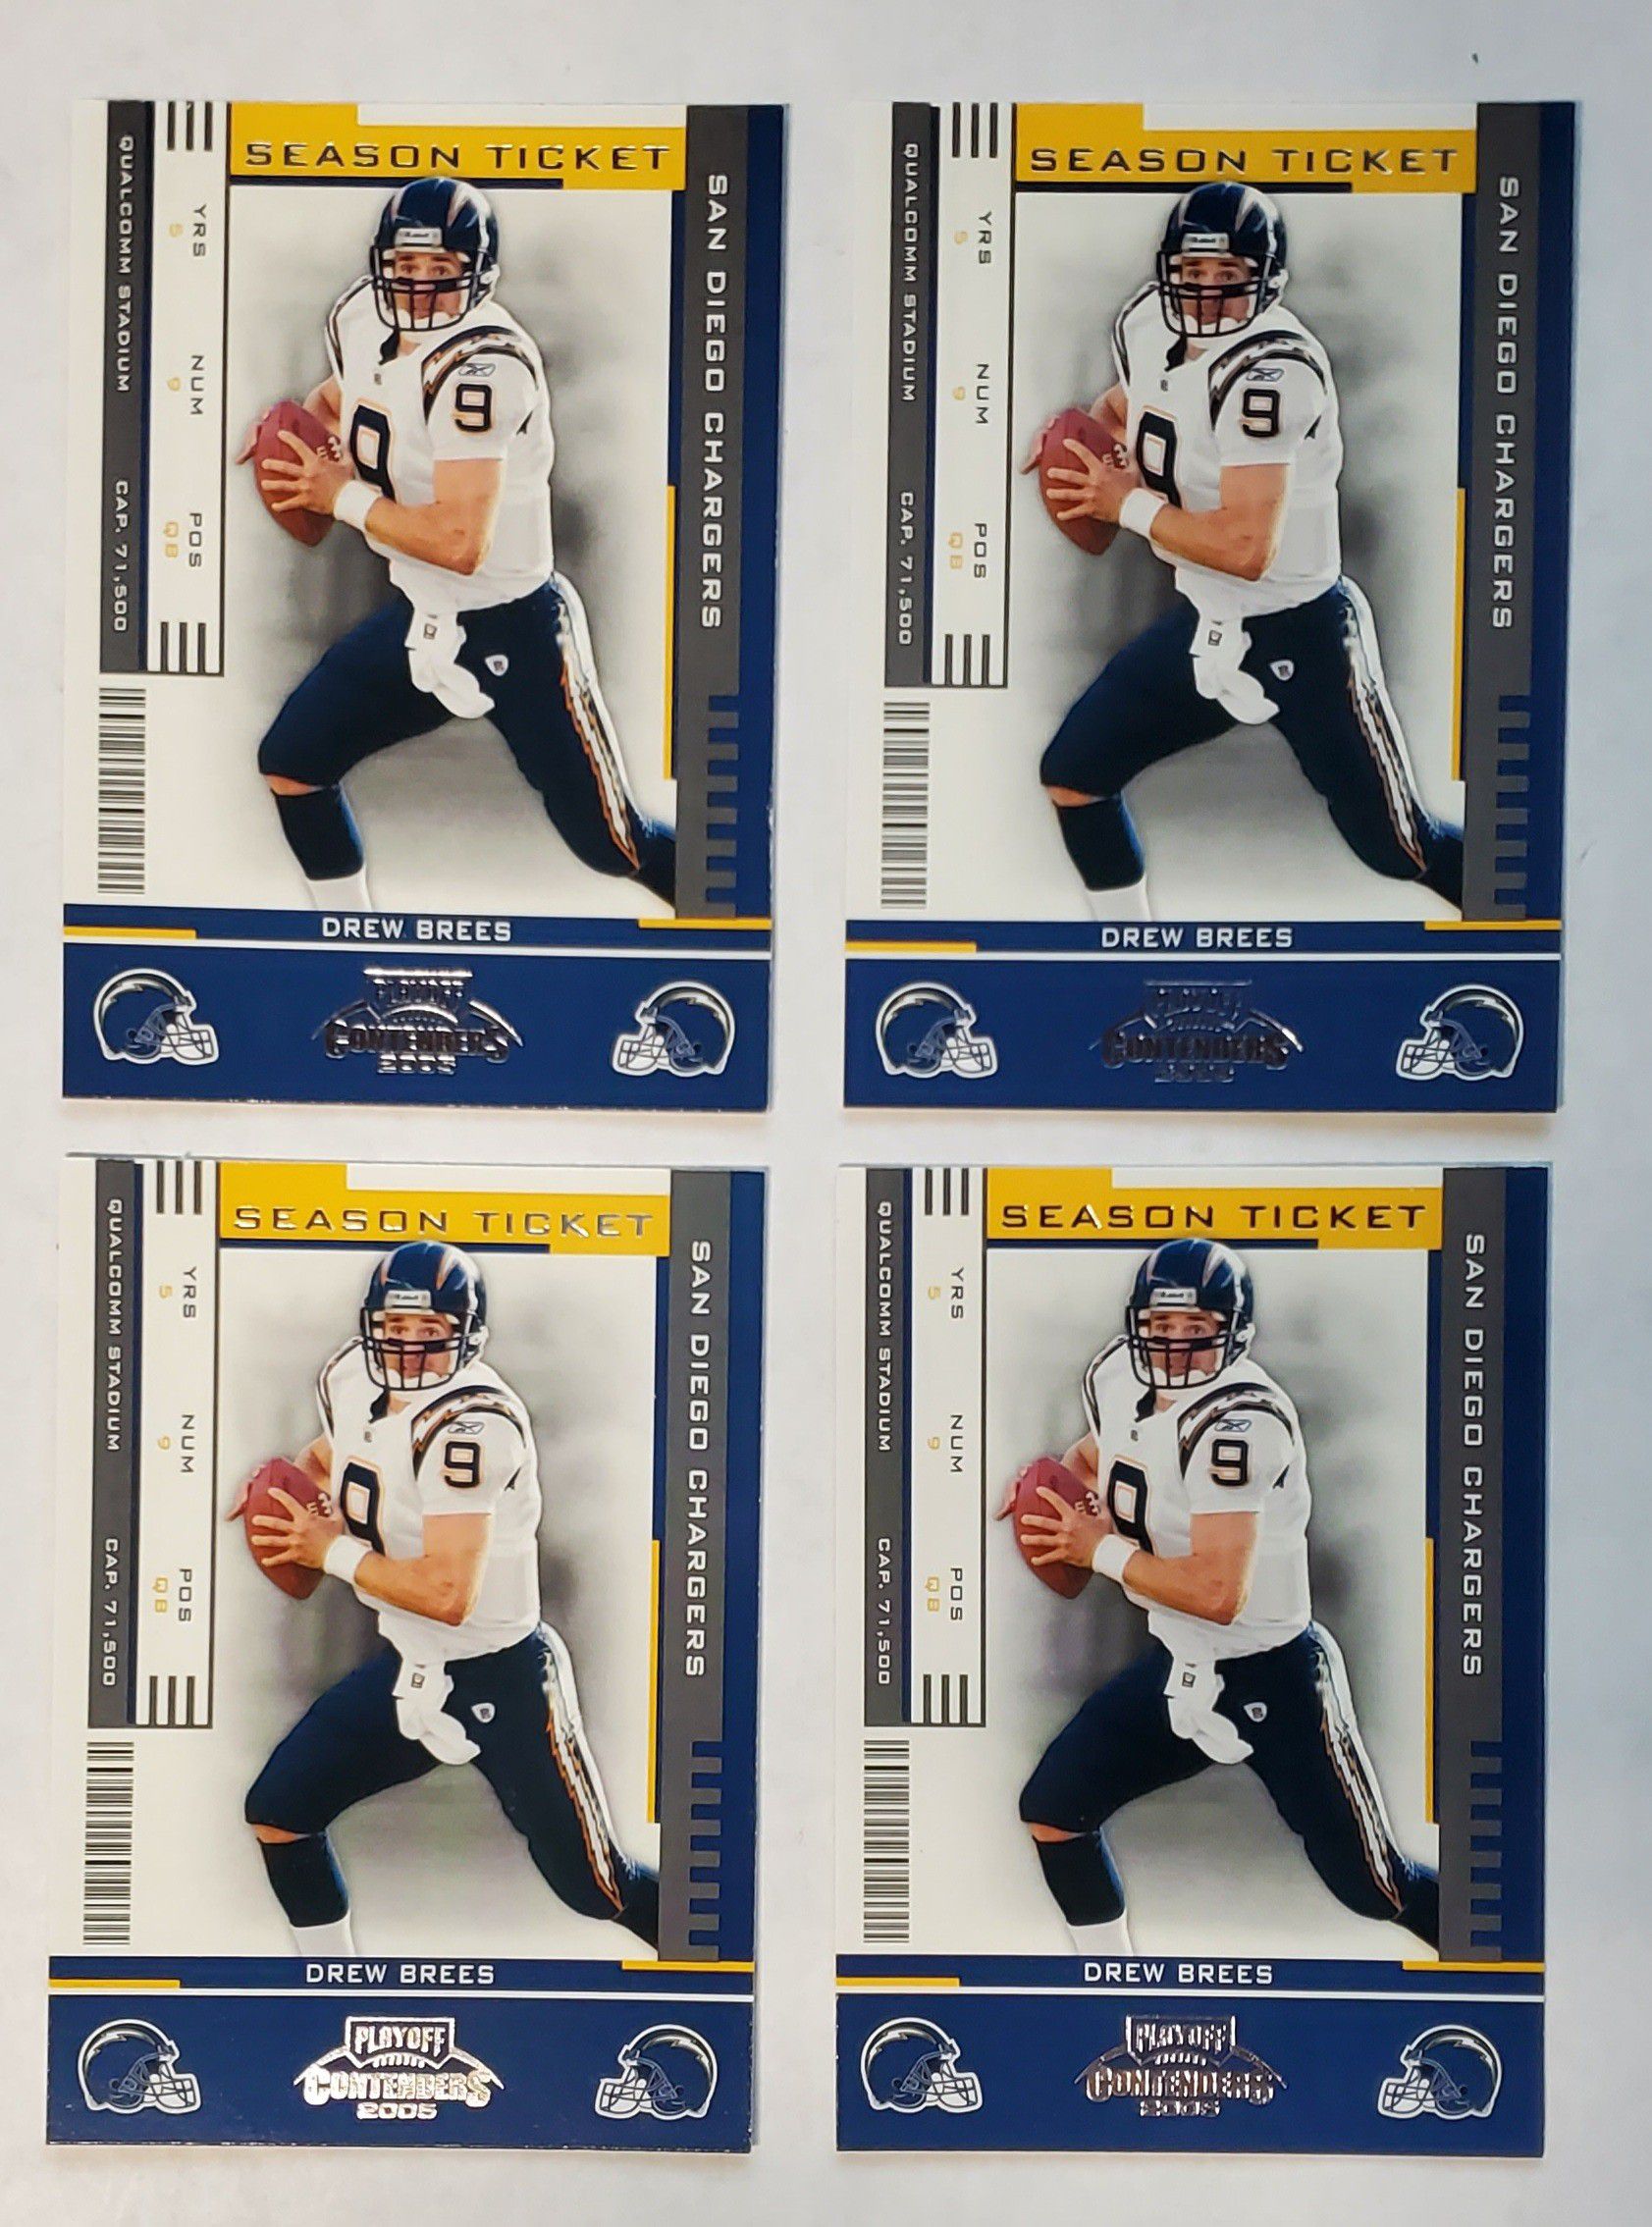 Drew Brees (4 Card Lot) 2005 Playoff Contenders Football Season Ticket #81 San Diego Chargers New Orleans Saints